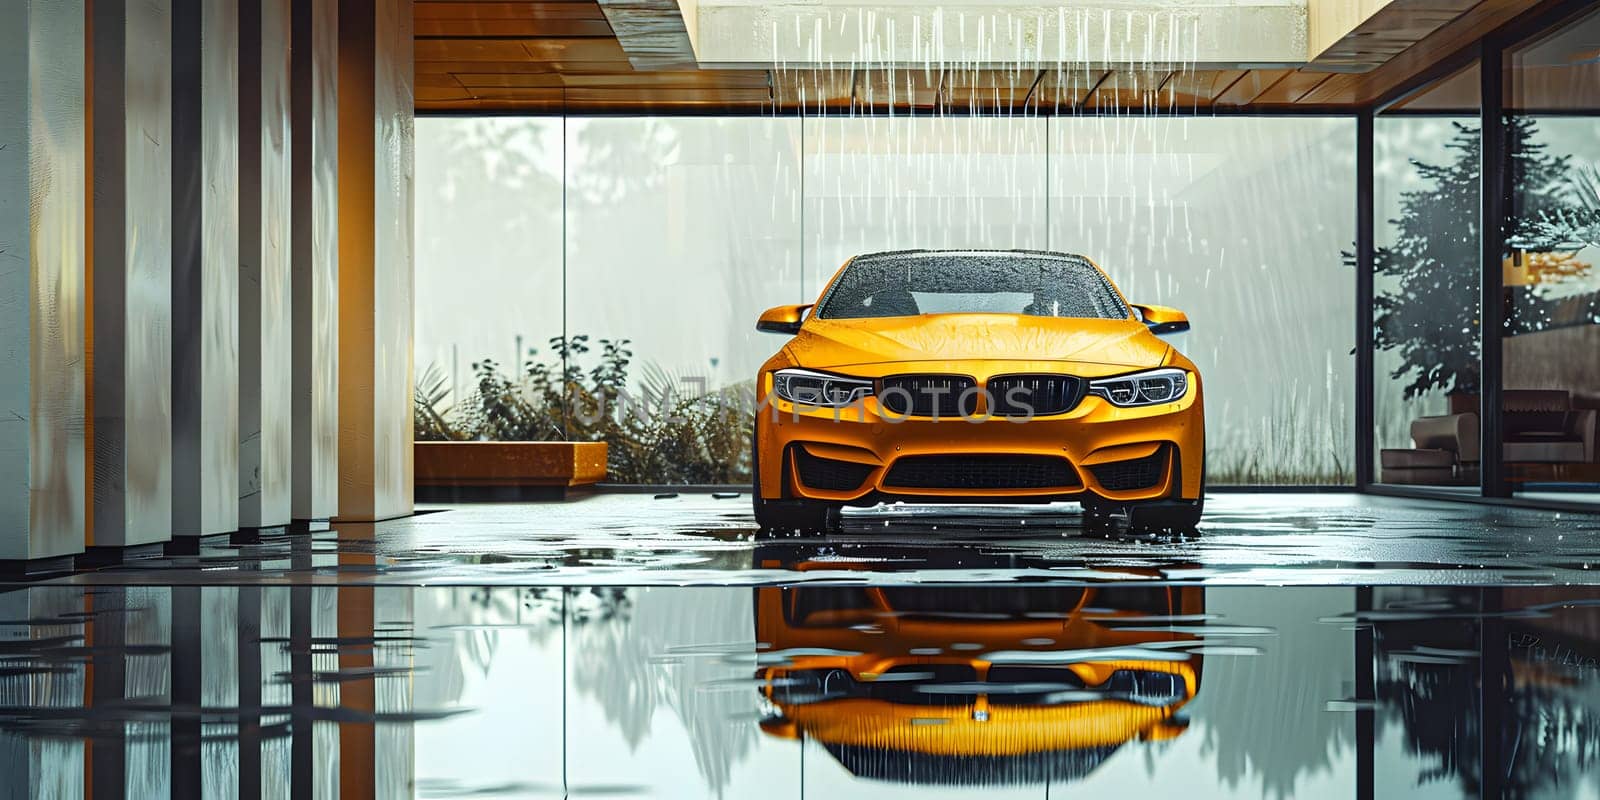 A sleek yellow BMW M4 is parked in a garage, with its shiny automotive lighting and stylish grille standing out. The vehicles tires, wheels, and hood are all perfectly designed